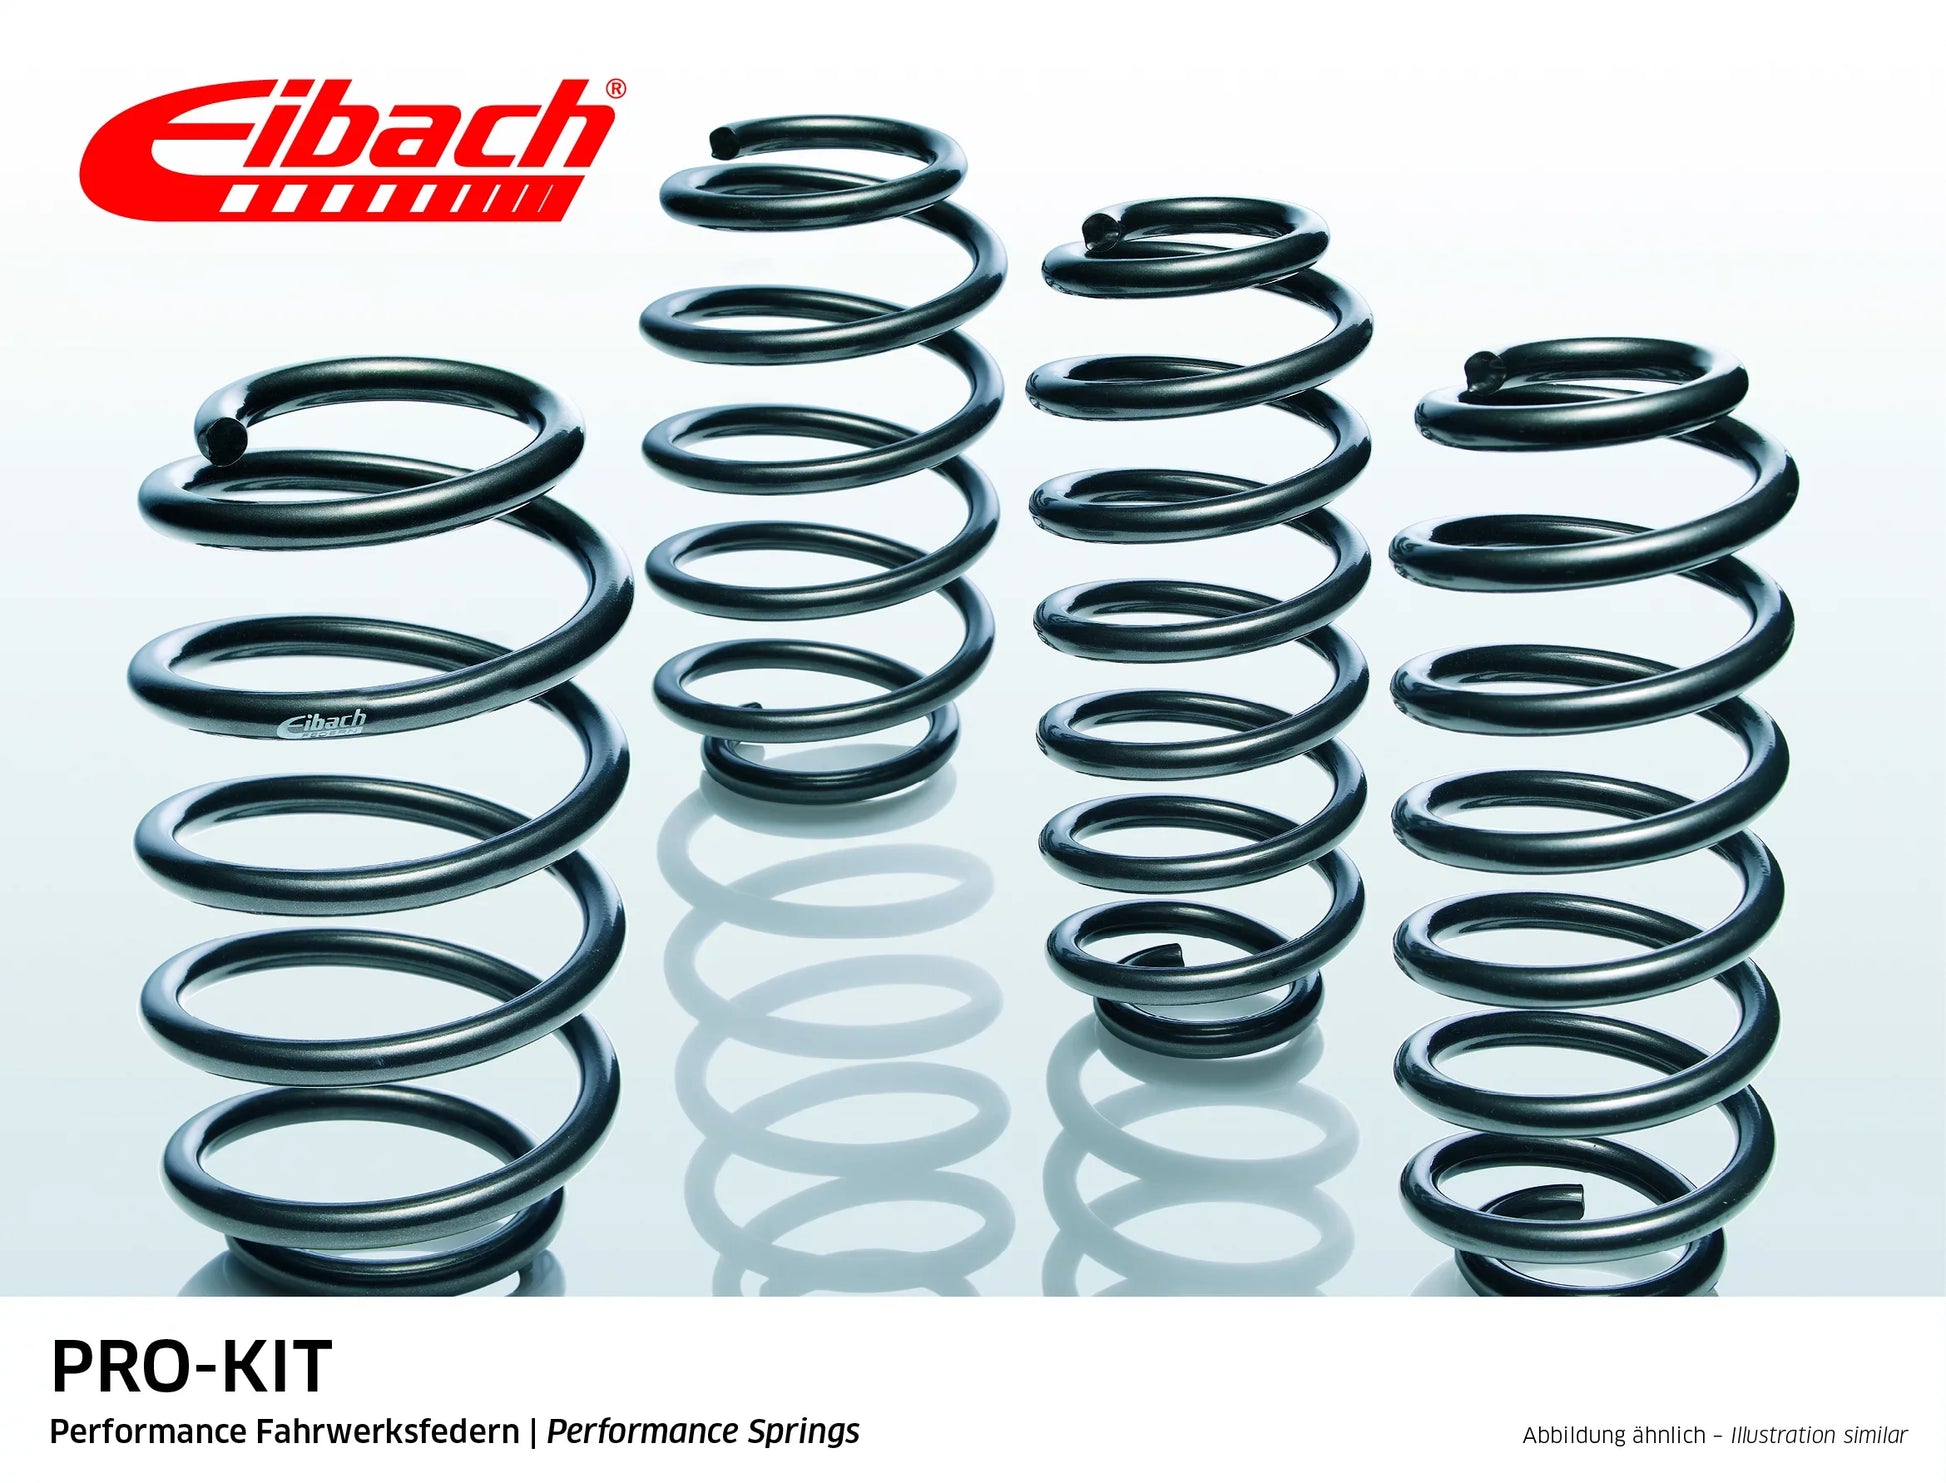 Eibach Pro-Kit Lowering Springs (E10-81-001-02-22) at £251.74